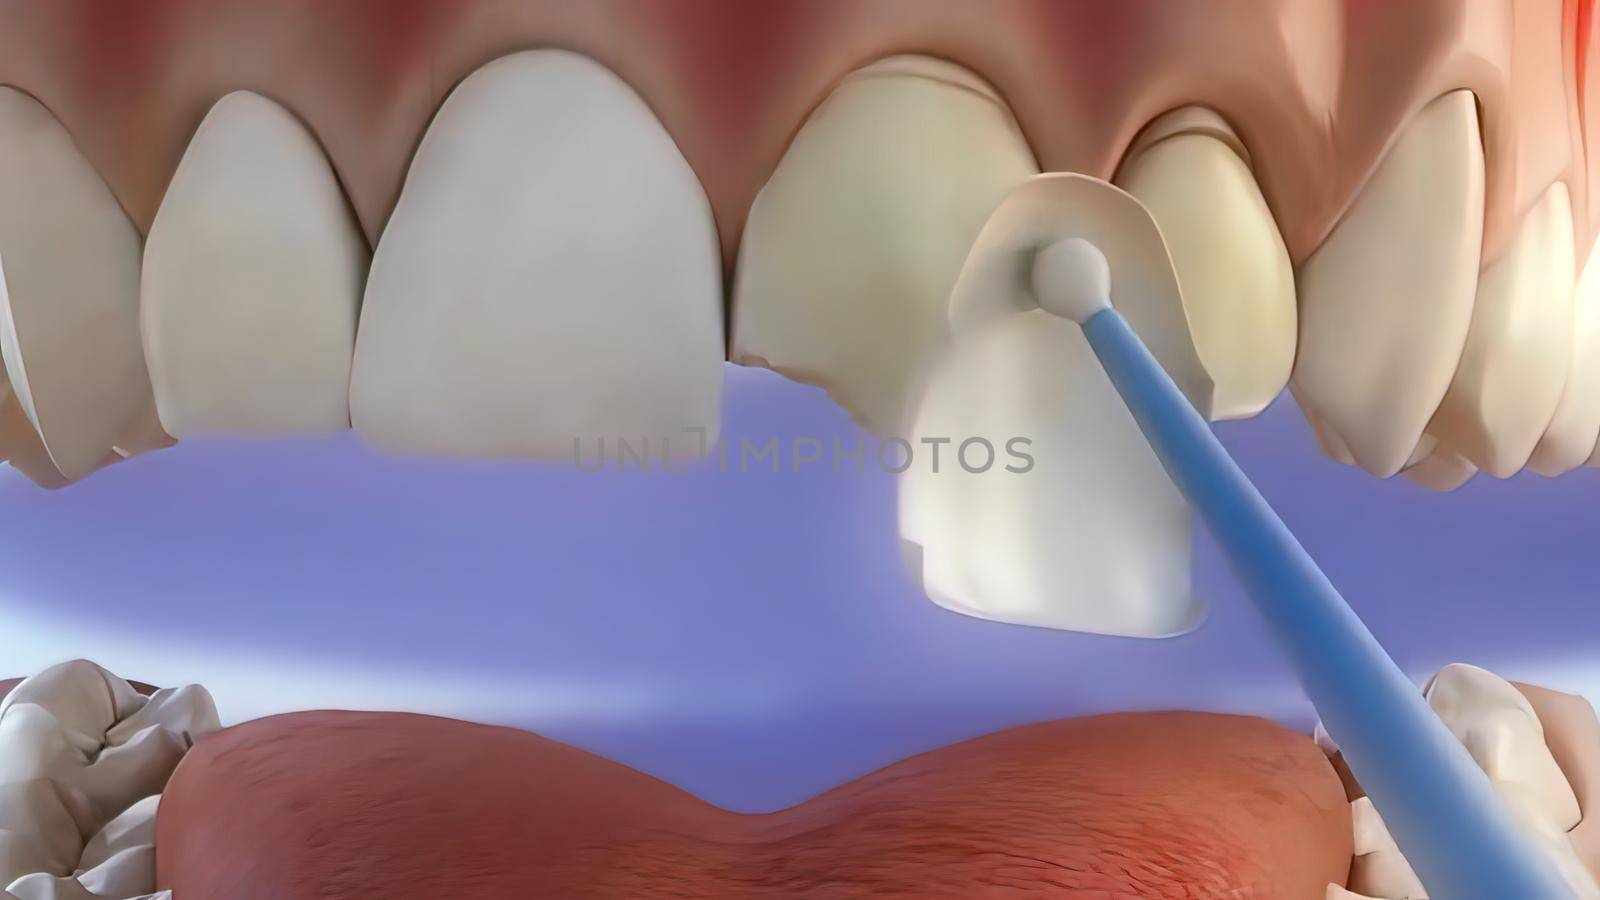 The process of chipping damaged teeth . 3D illustration